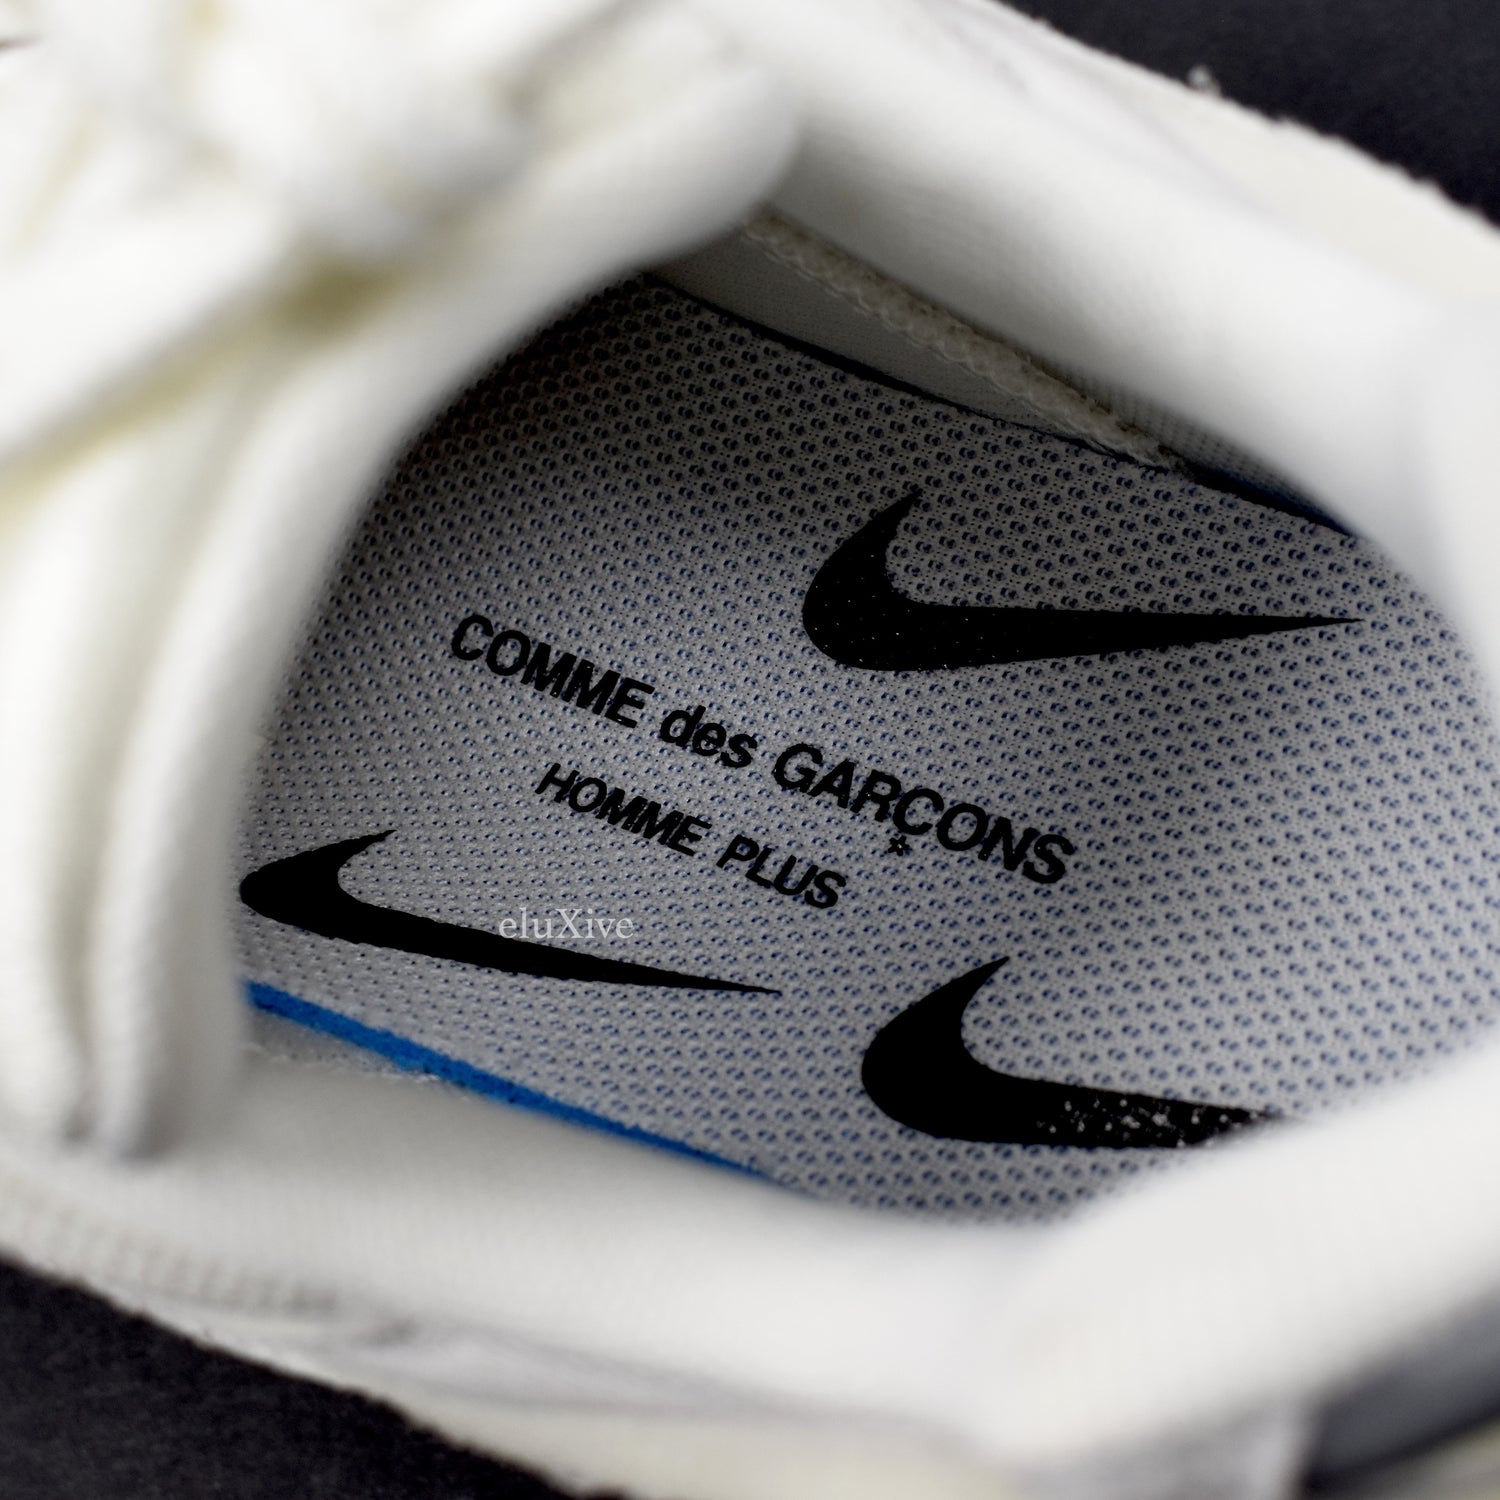 hacer clic whisky voluntario Comme des Garcons x Nike - Air Max 95 CDG (White) – eluXive